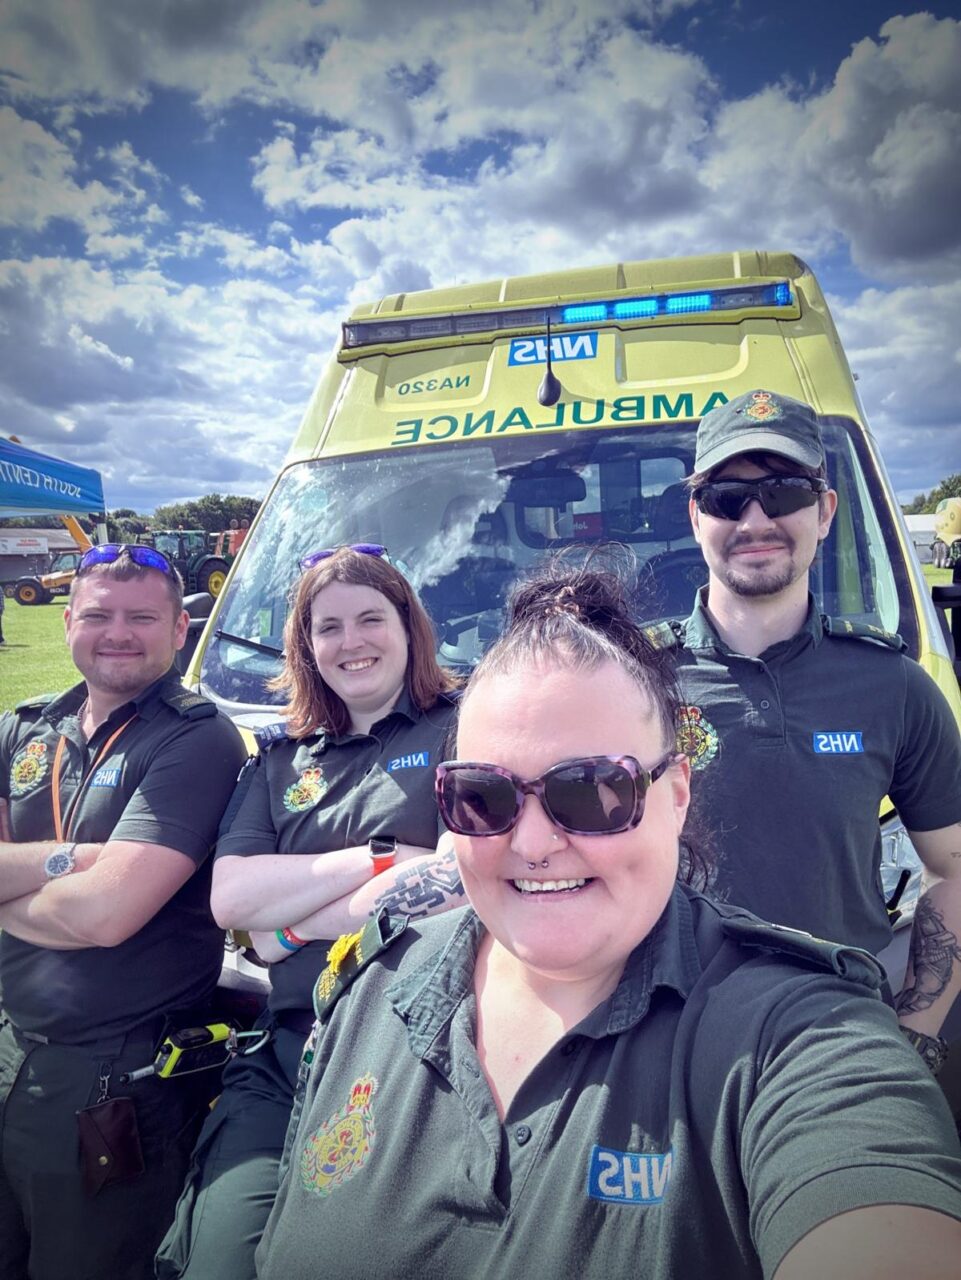 SCAS staff at Berkshire County Fayre